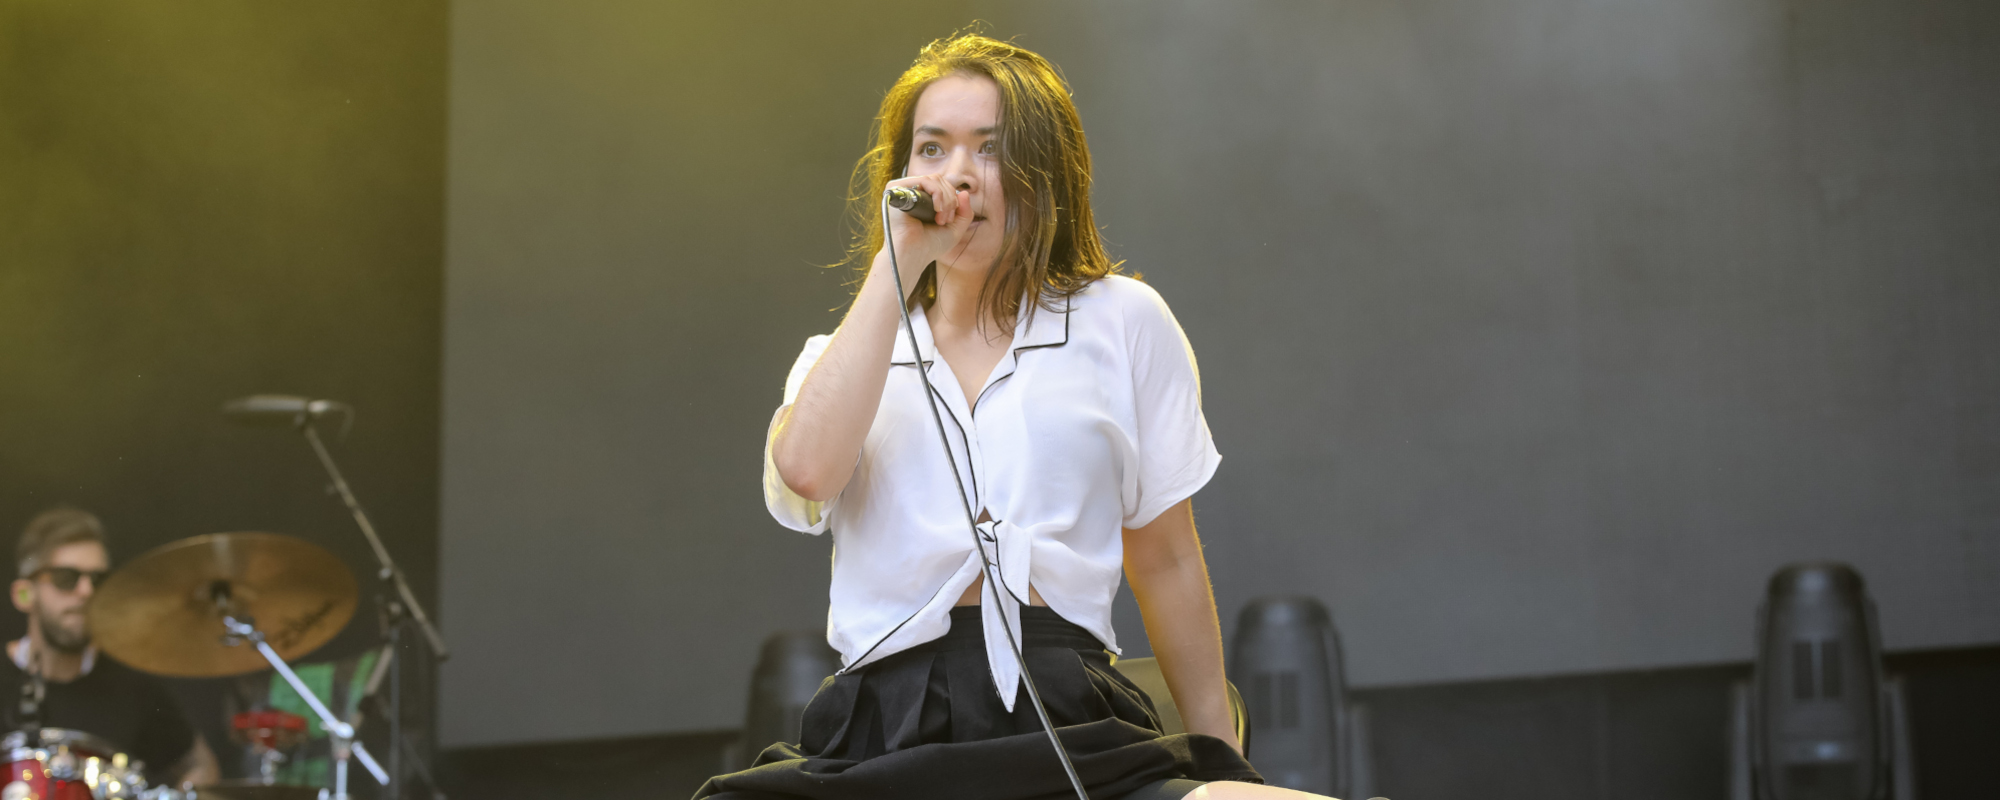 Singer/Songwriter Mitski Questions Cell Phone Usage at Shows